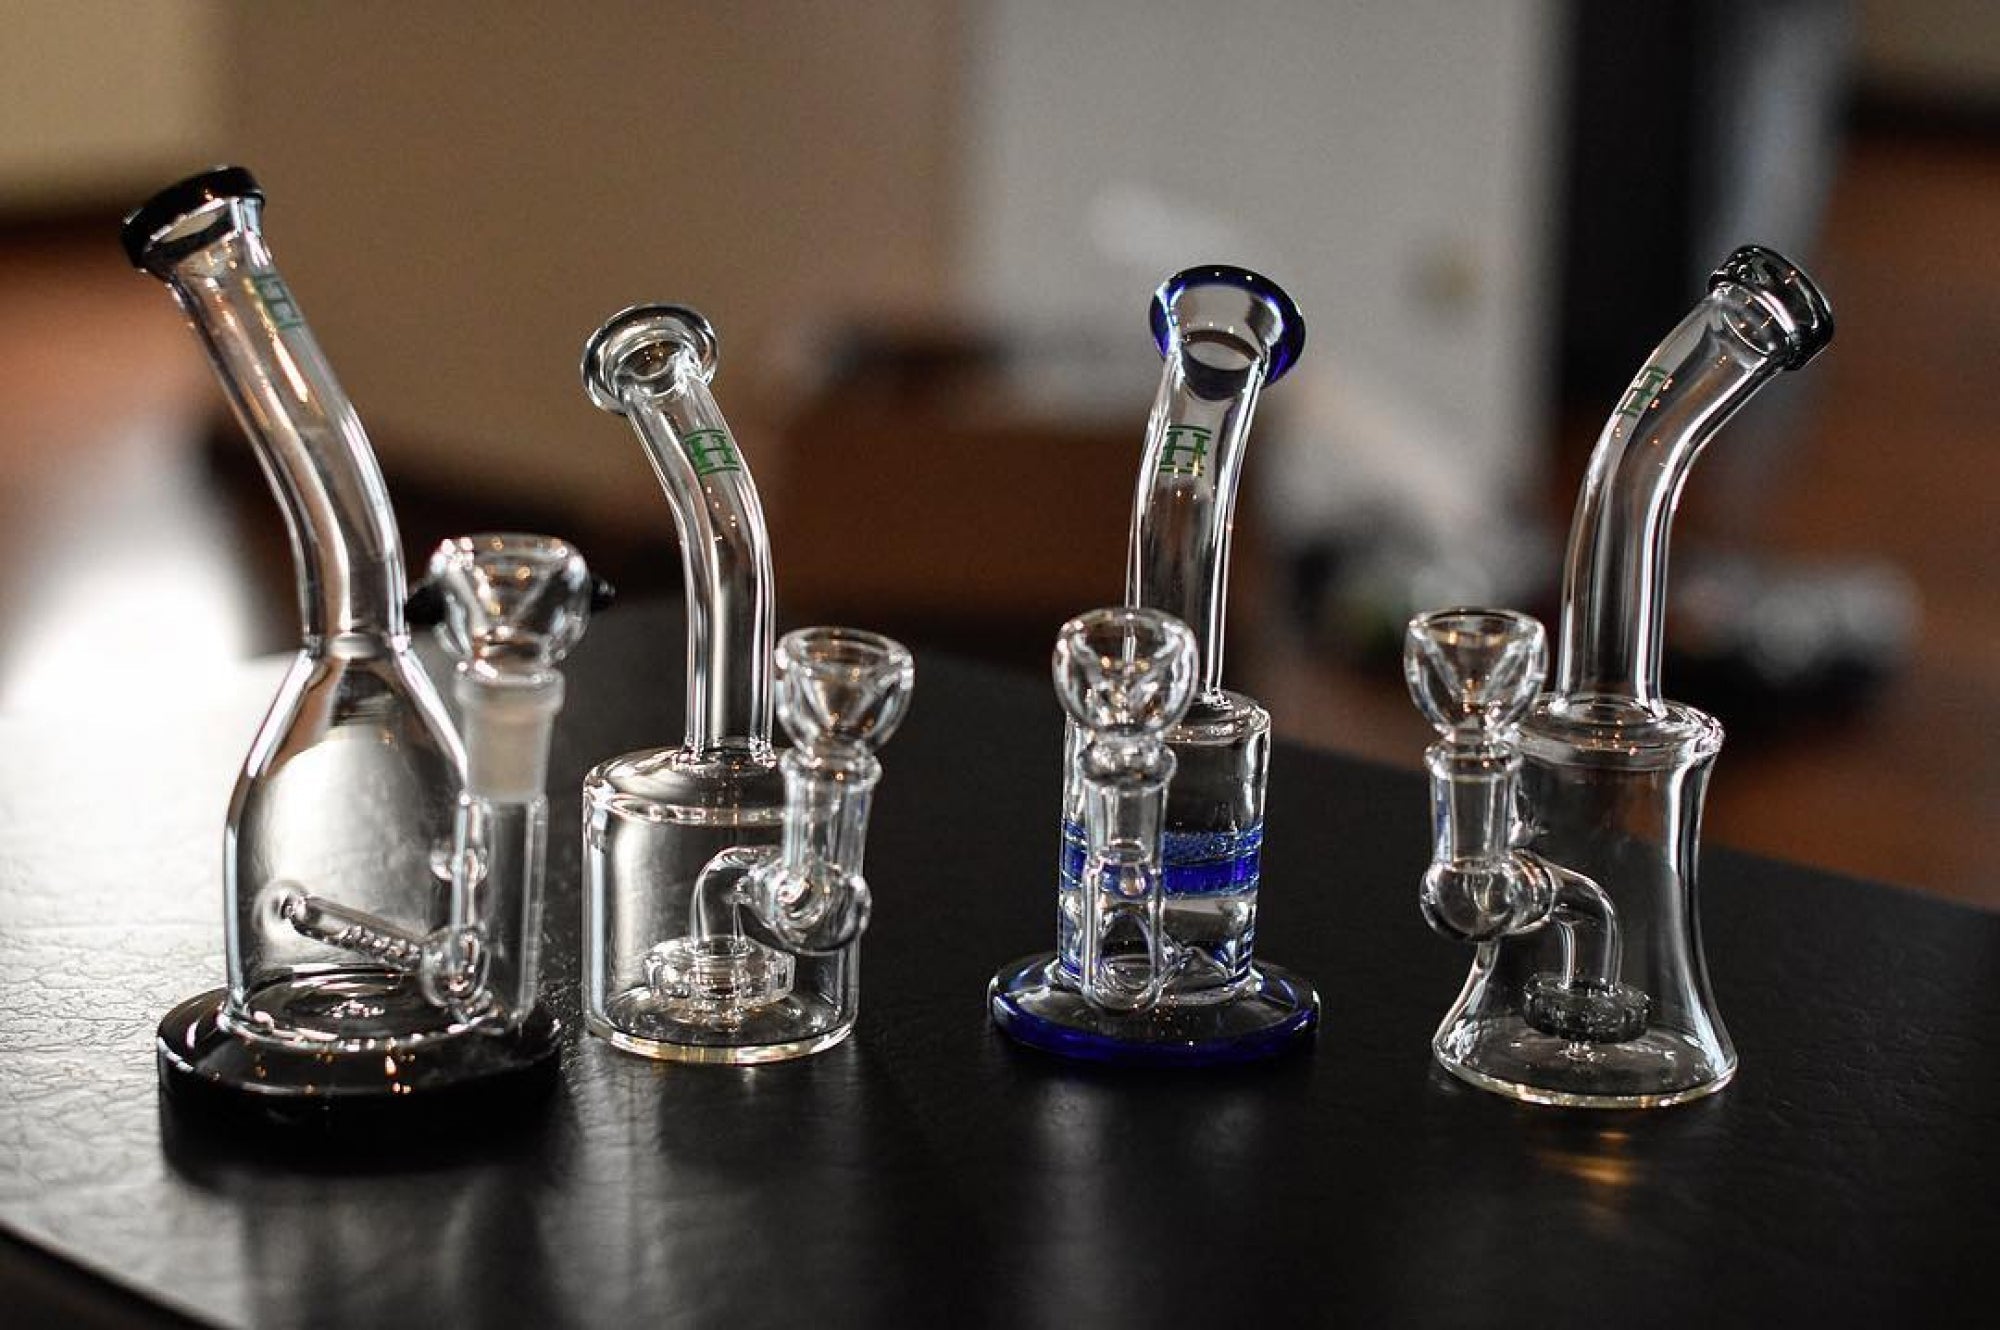 14MM GLASS NECTAR COLLECTOR TIP – Dabs Glass